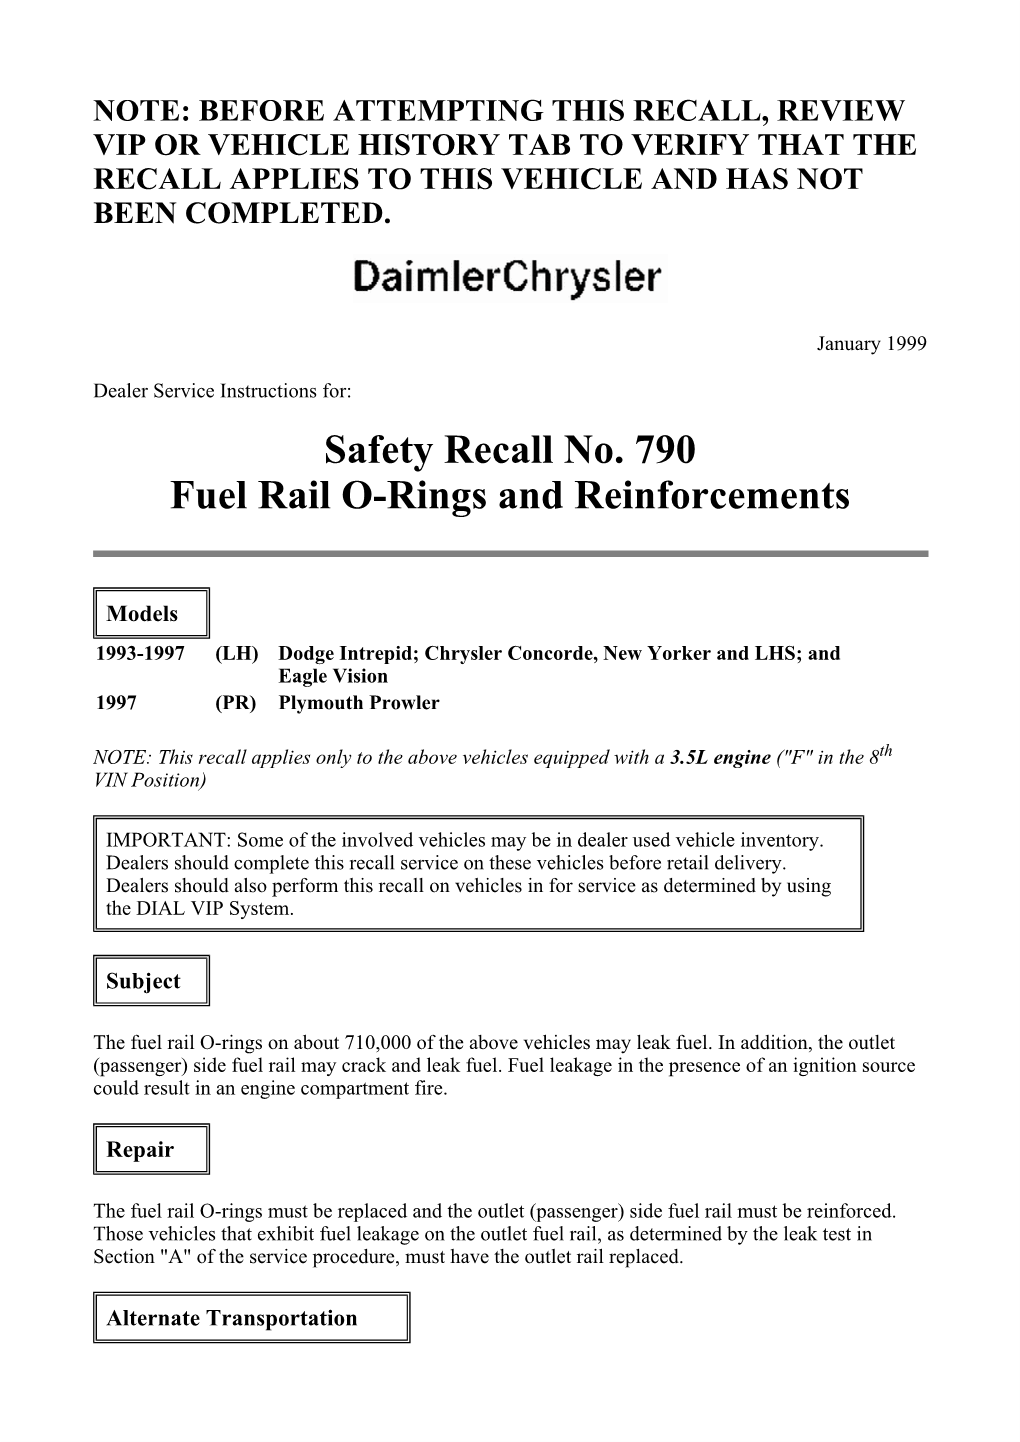 Safety Recall No. 790 Fuel Rail O-Rings and Reinforcements